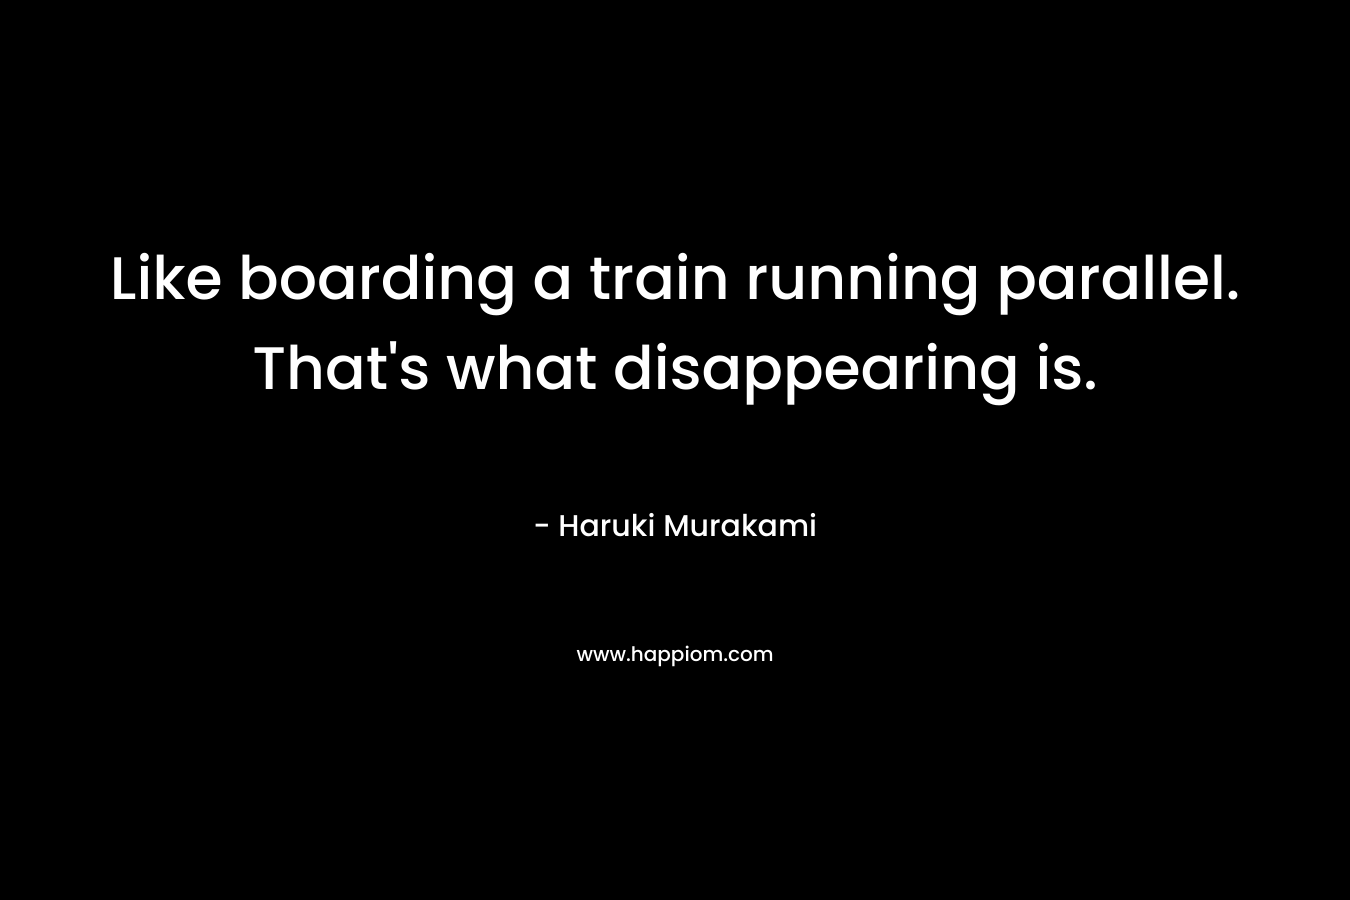 Like boarding a train running parallel. That’s what disappearing is. – Haruki Murakami